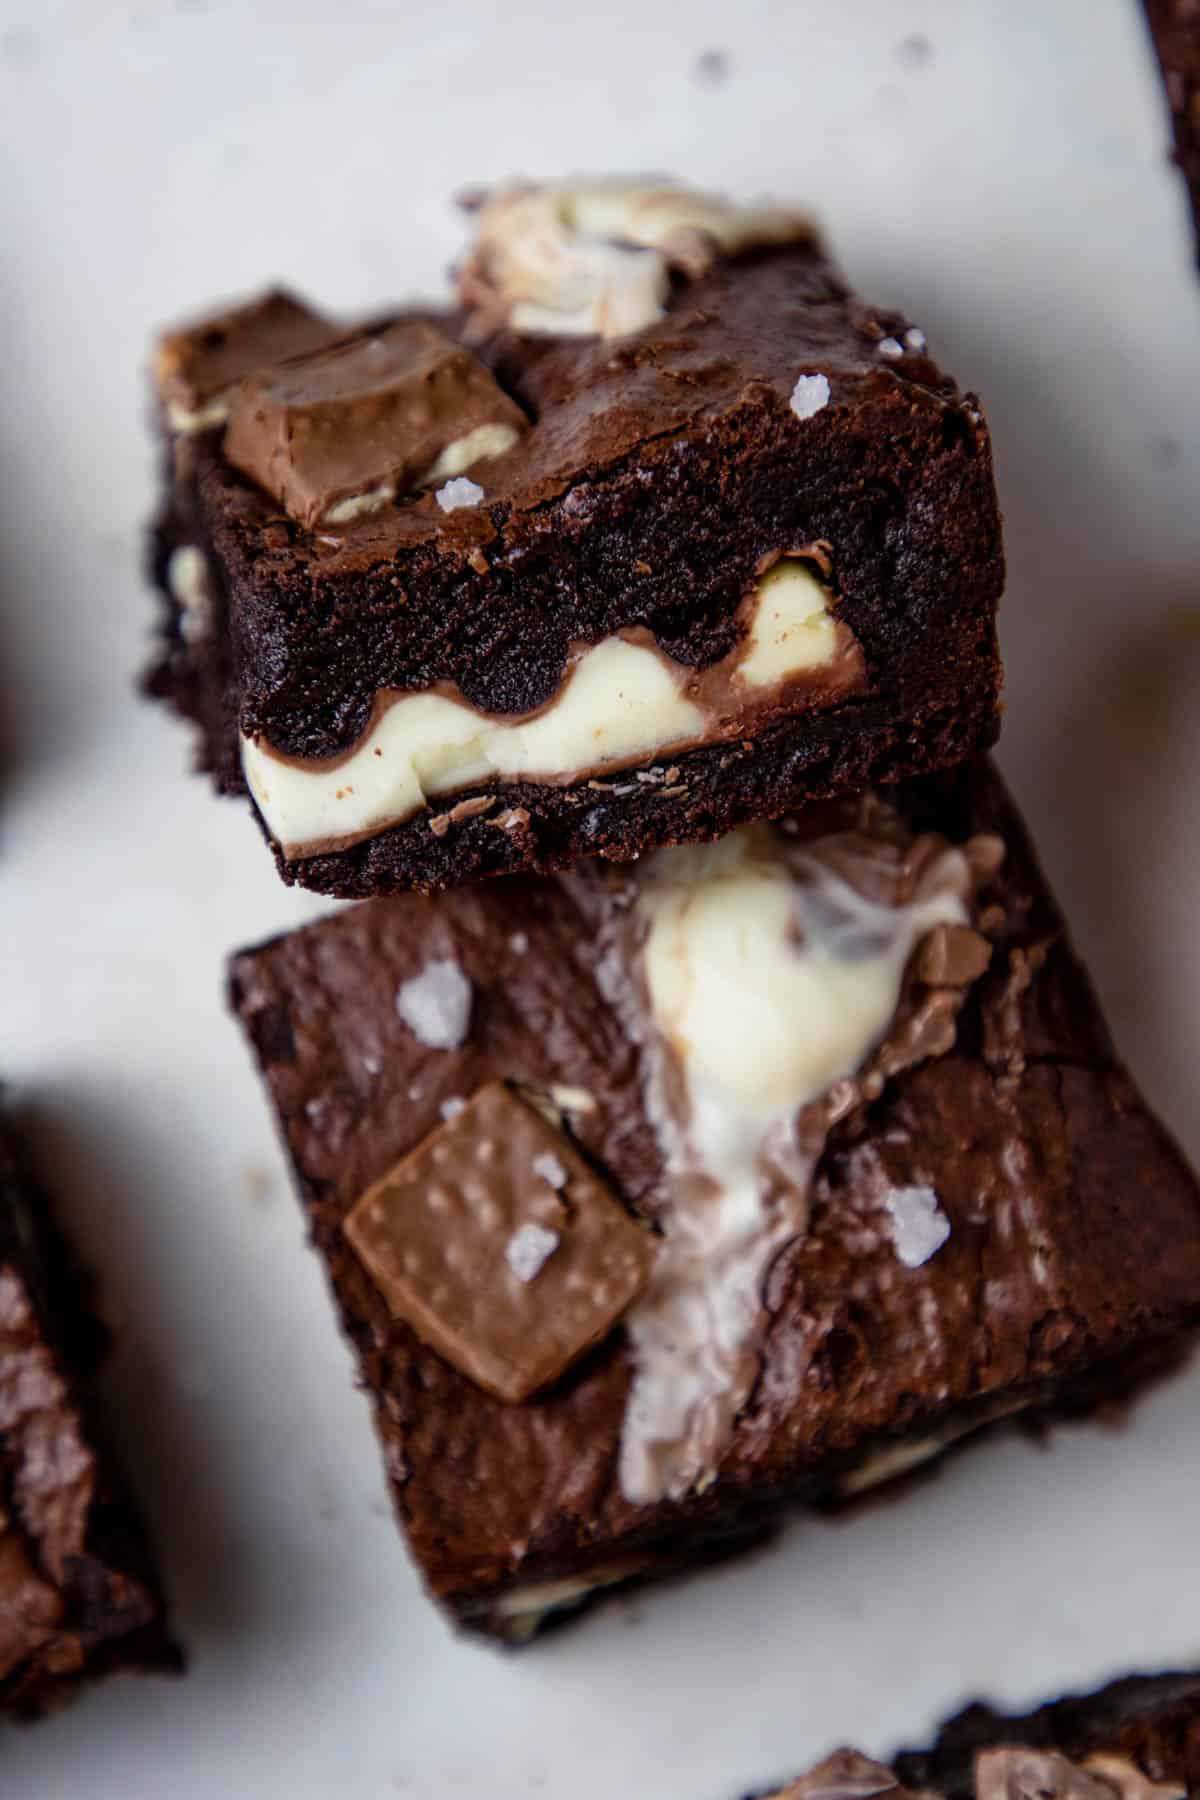 a close up picture showing the kinder brownies 